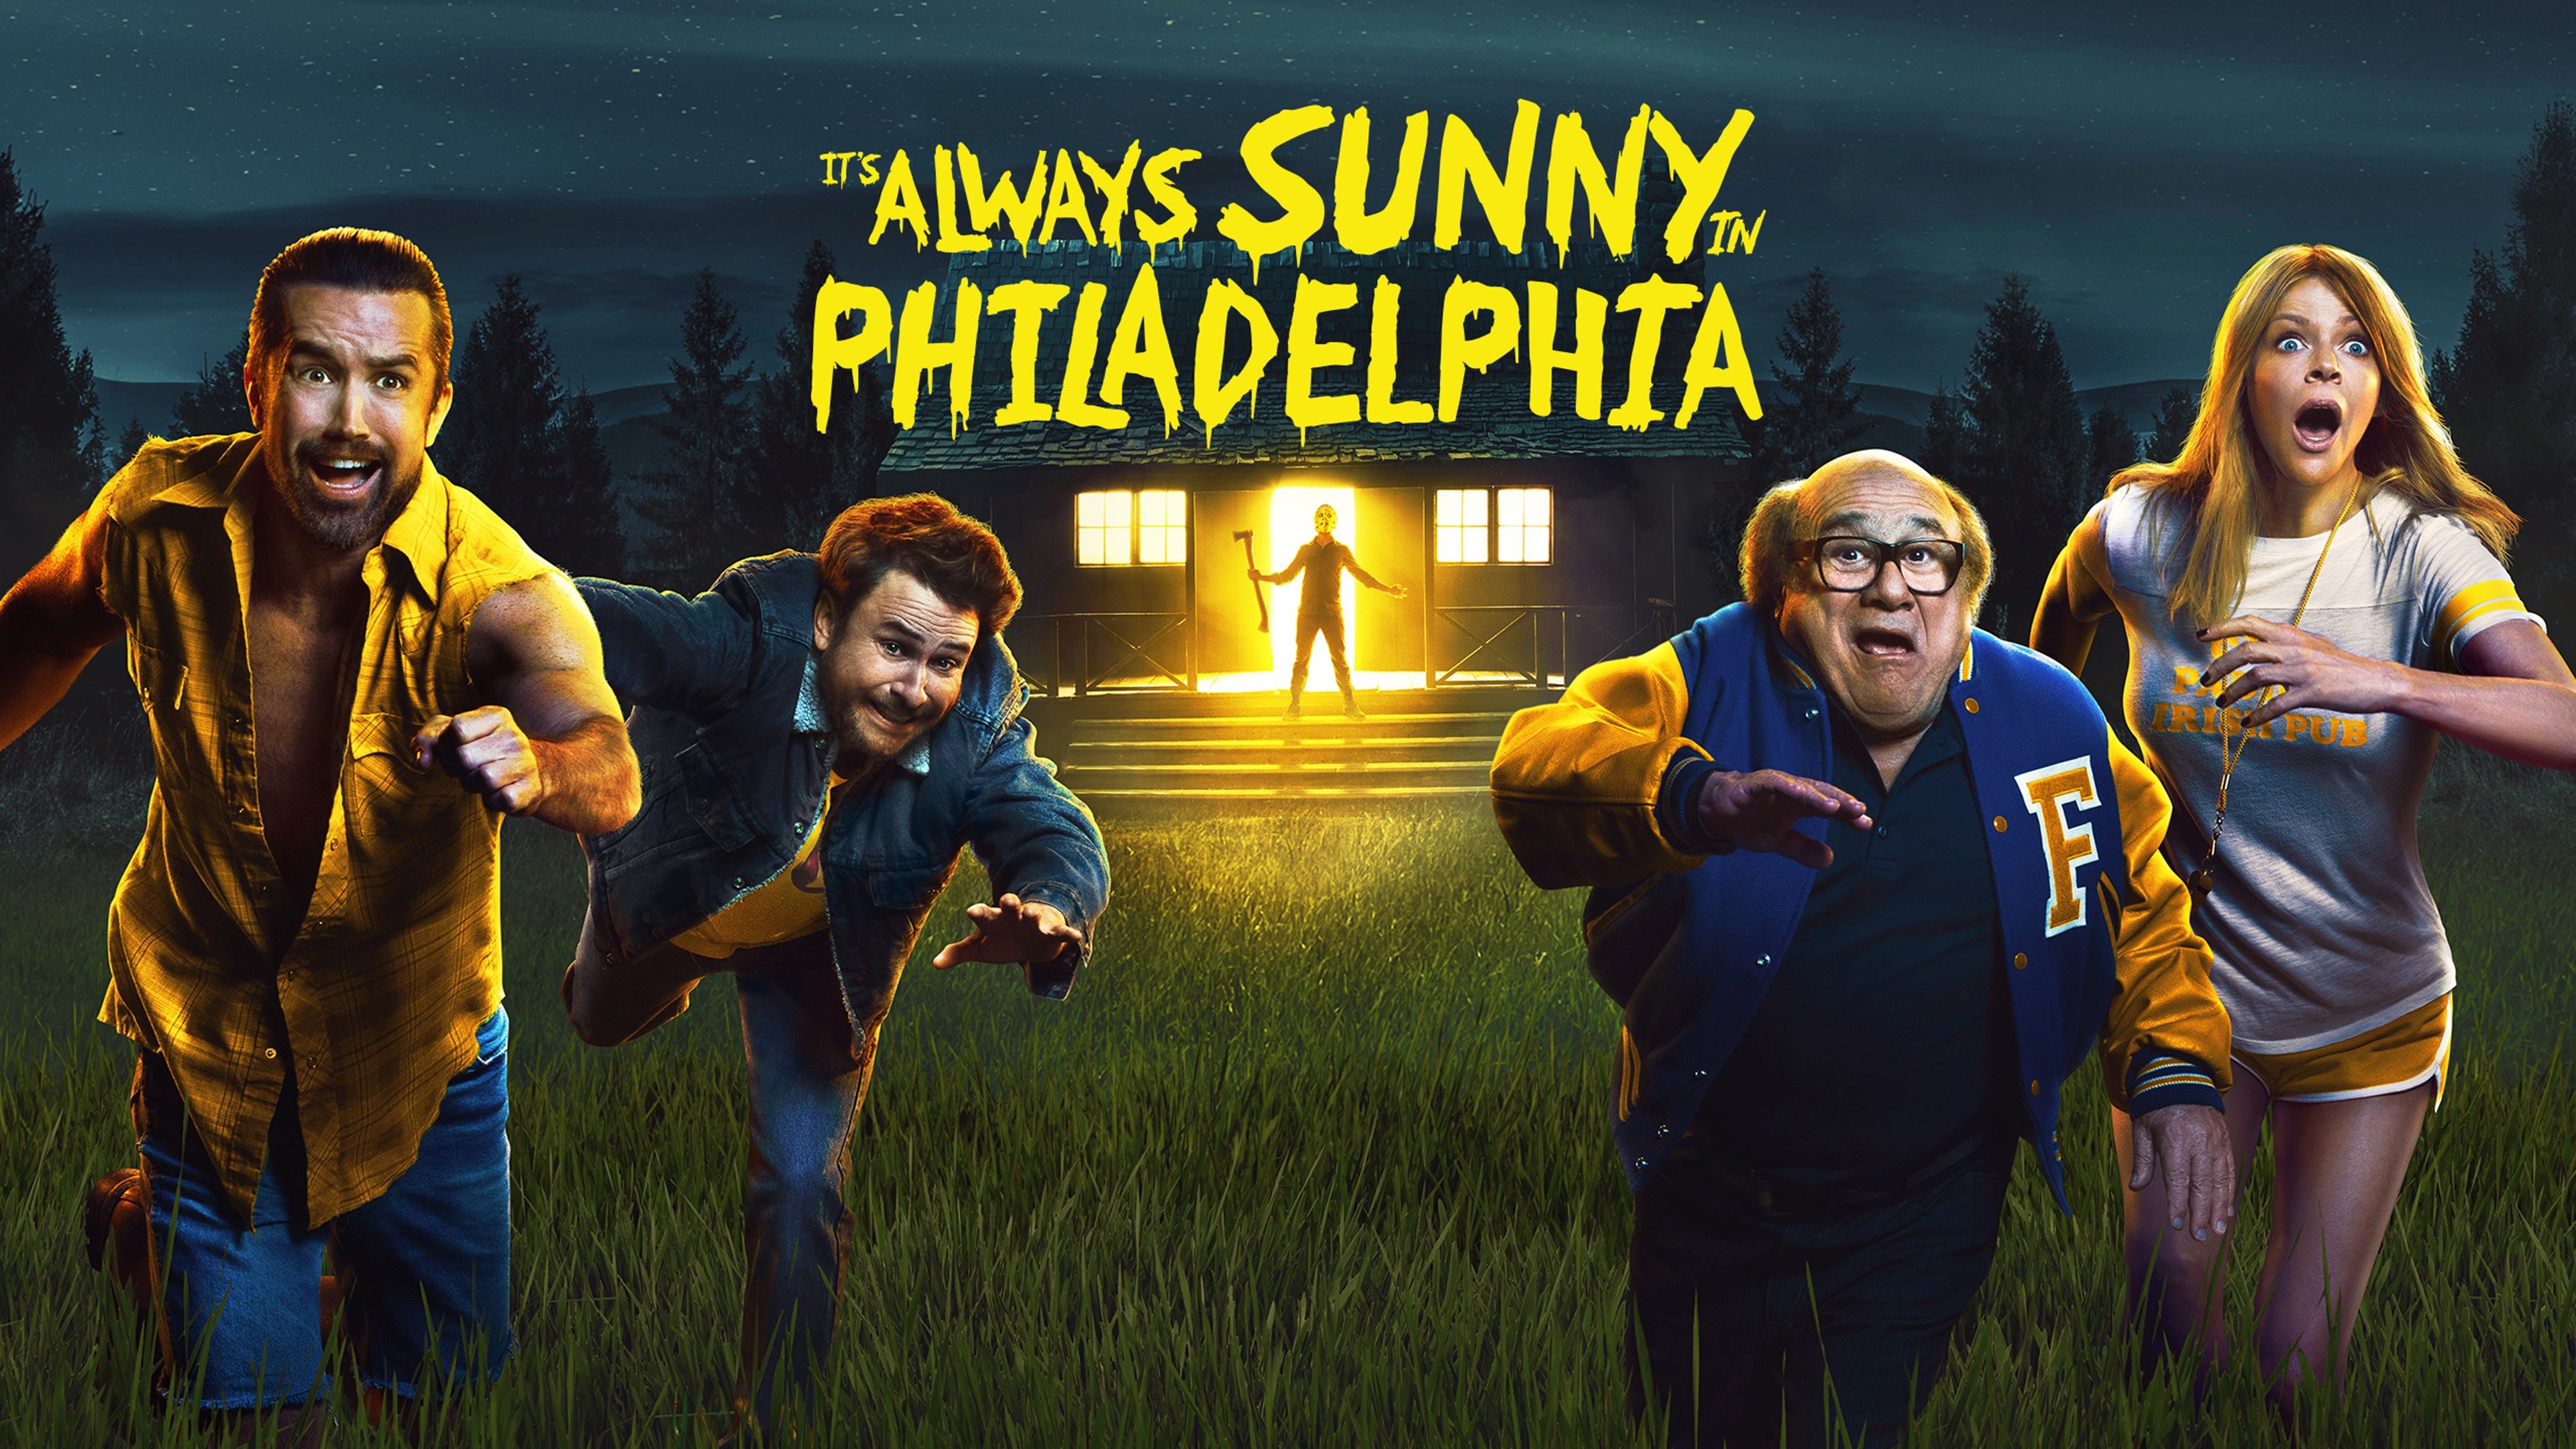 Wallpapers TV show its always sunny in philadelphia fright on the desktop